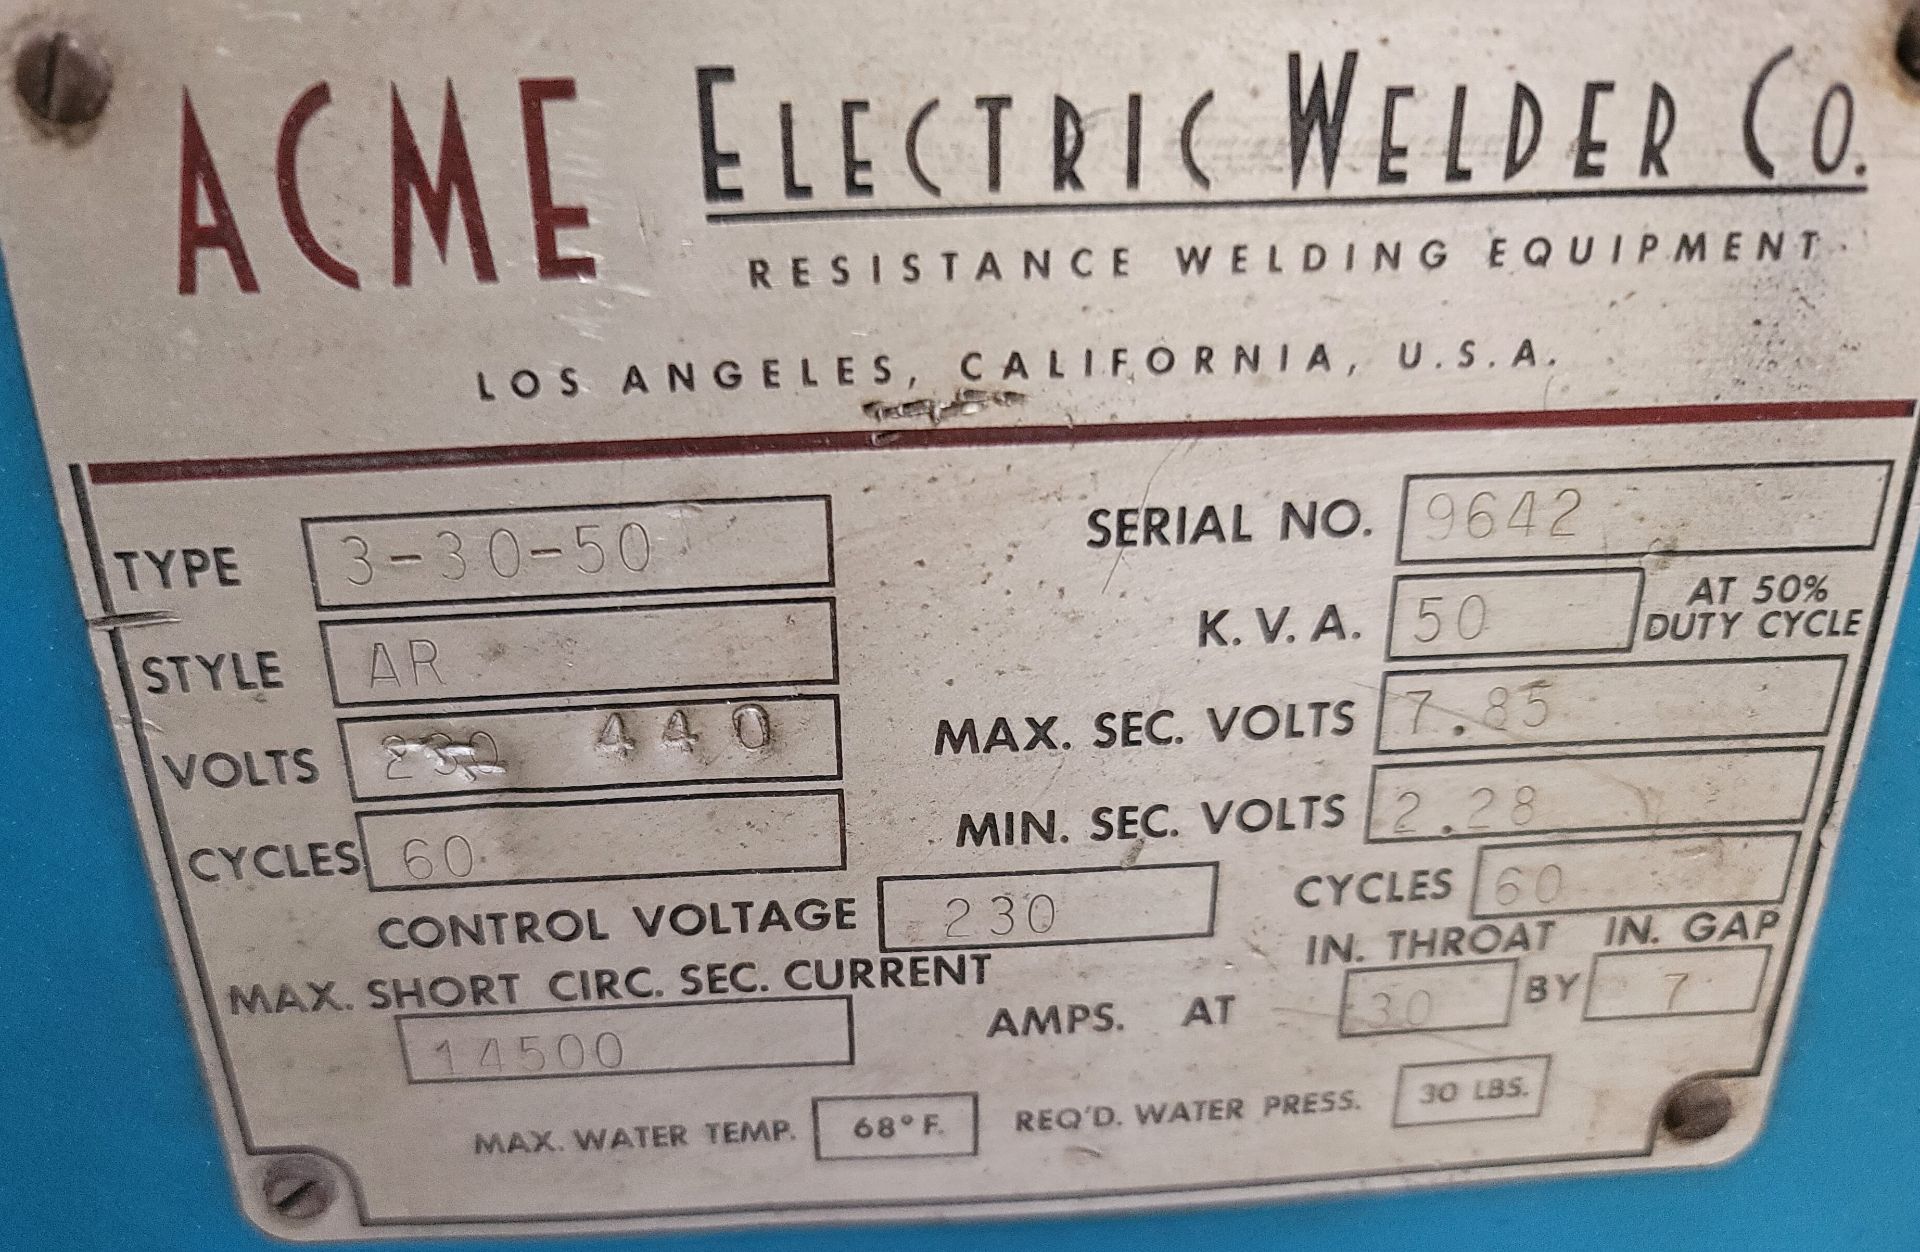 ACME 50 KVA SPOT WELDER, TYPE: 3-30-50, STYLE: AR, 440 V, CONTROL VOLTAGE: 230, S/N 9642, 22" - Image 3 of 3